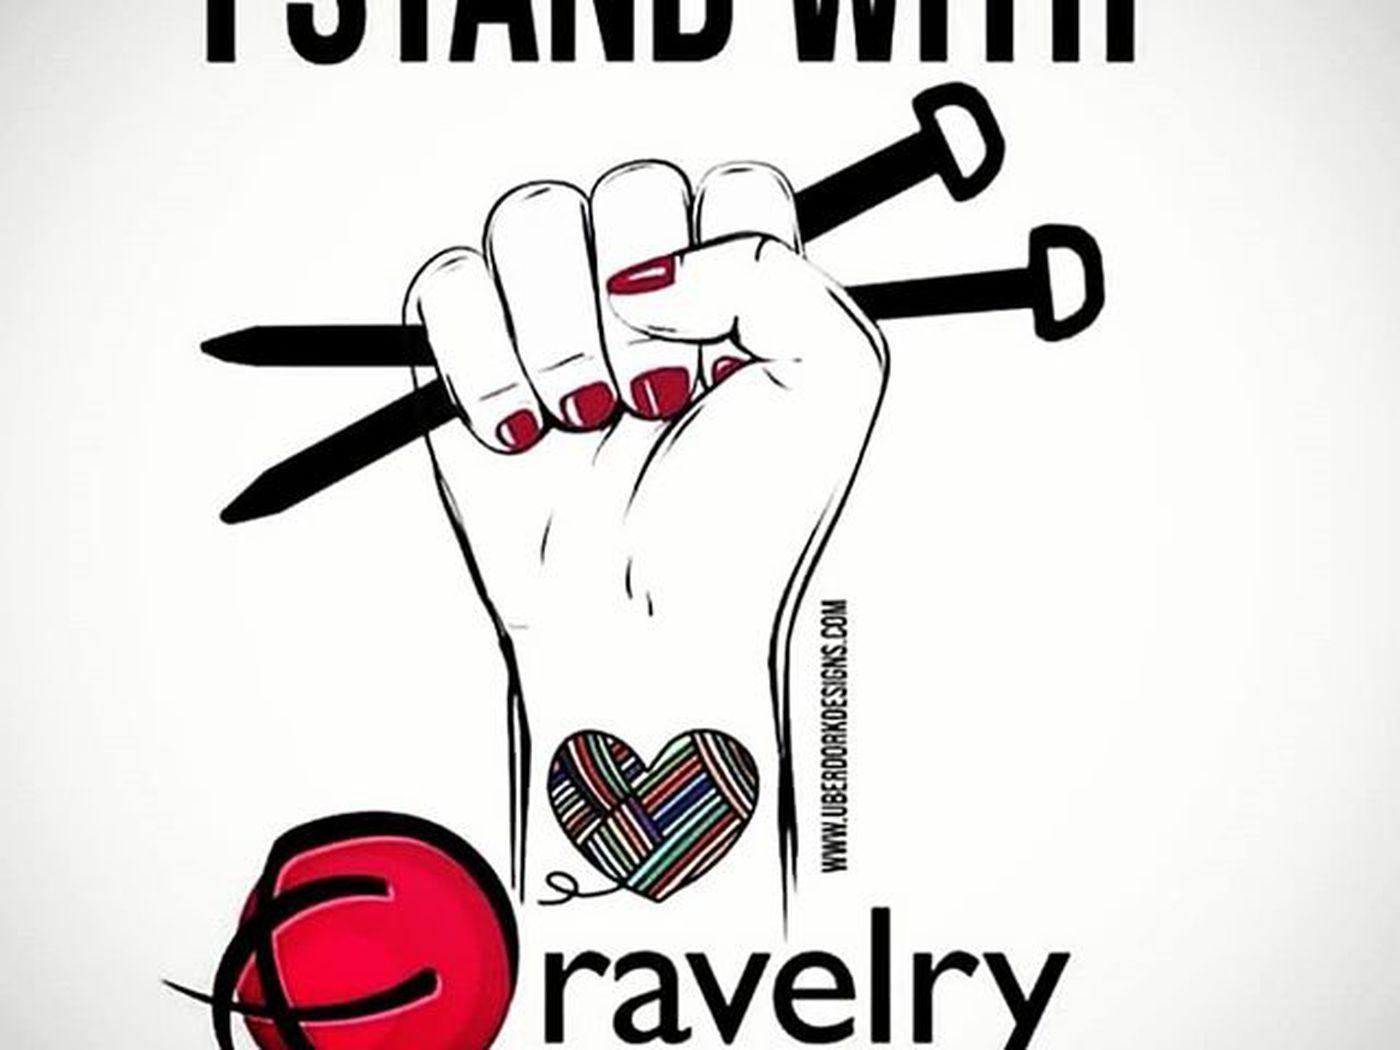 Ravelry Logo - Ravelry bans Trump support: why a knitting website is facing